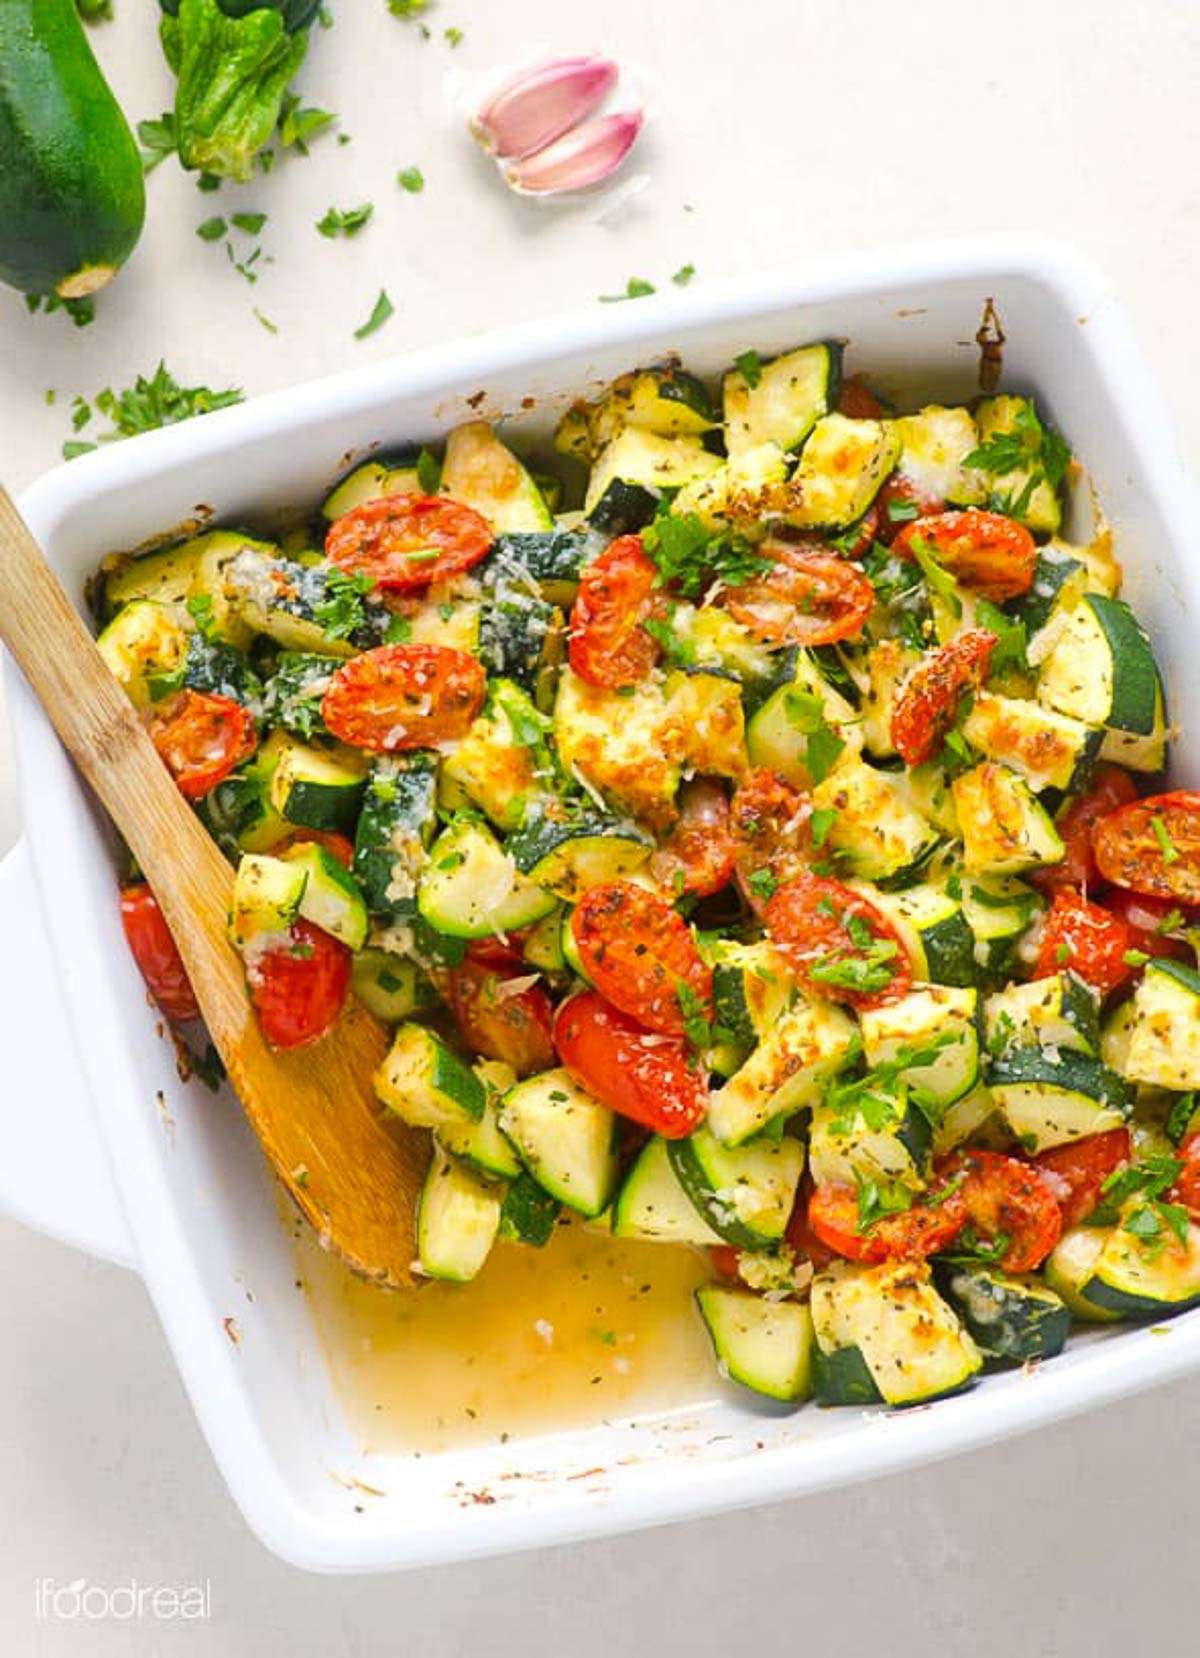 Healthy zucchini tomato bake in a casserole dish with a wooden spoon.